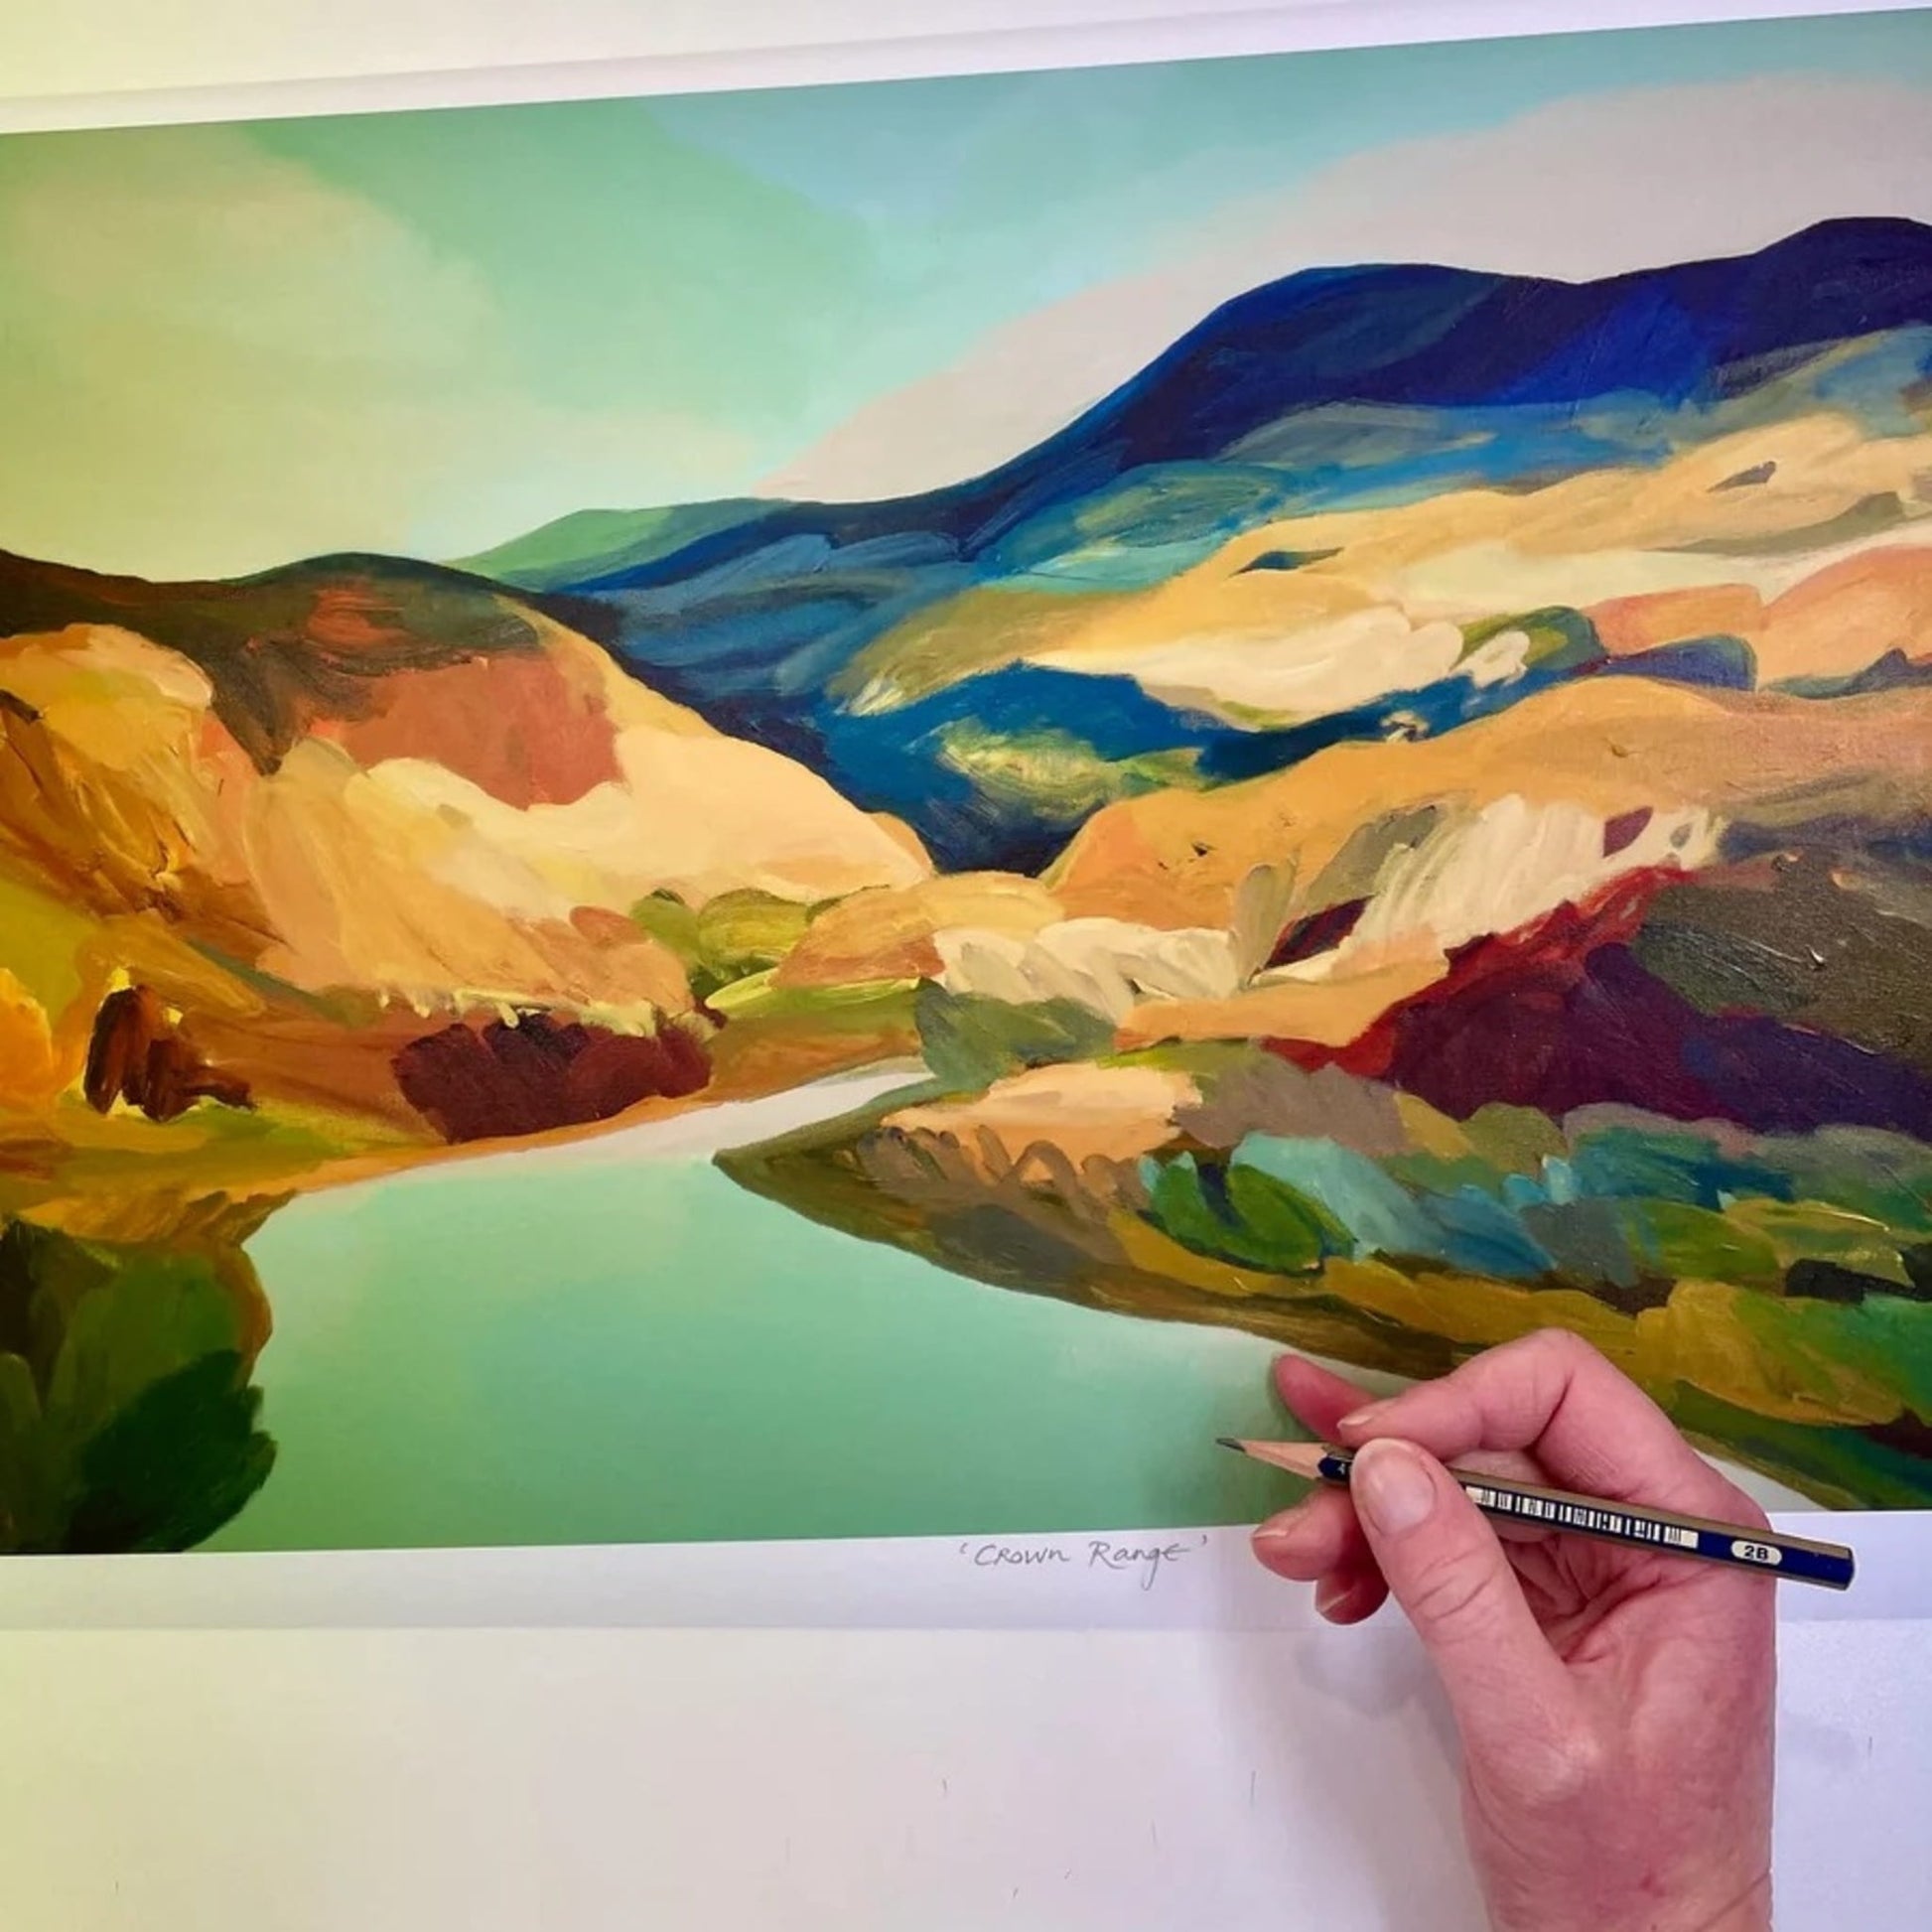 Colourful print of Crown Range with the bright blue Cardrona River in the foreground.